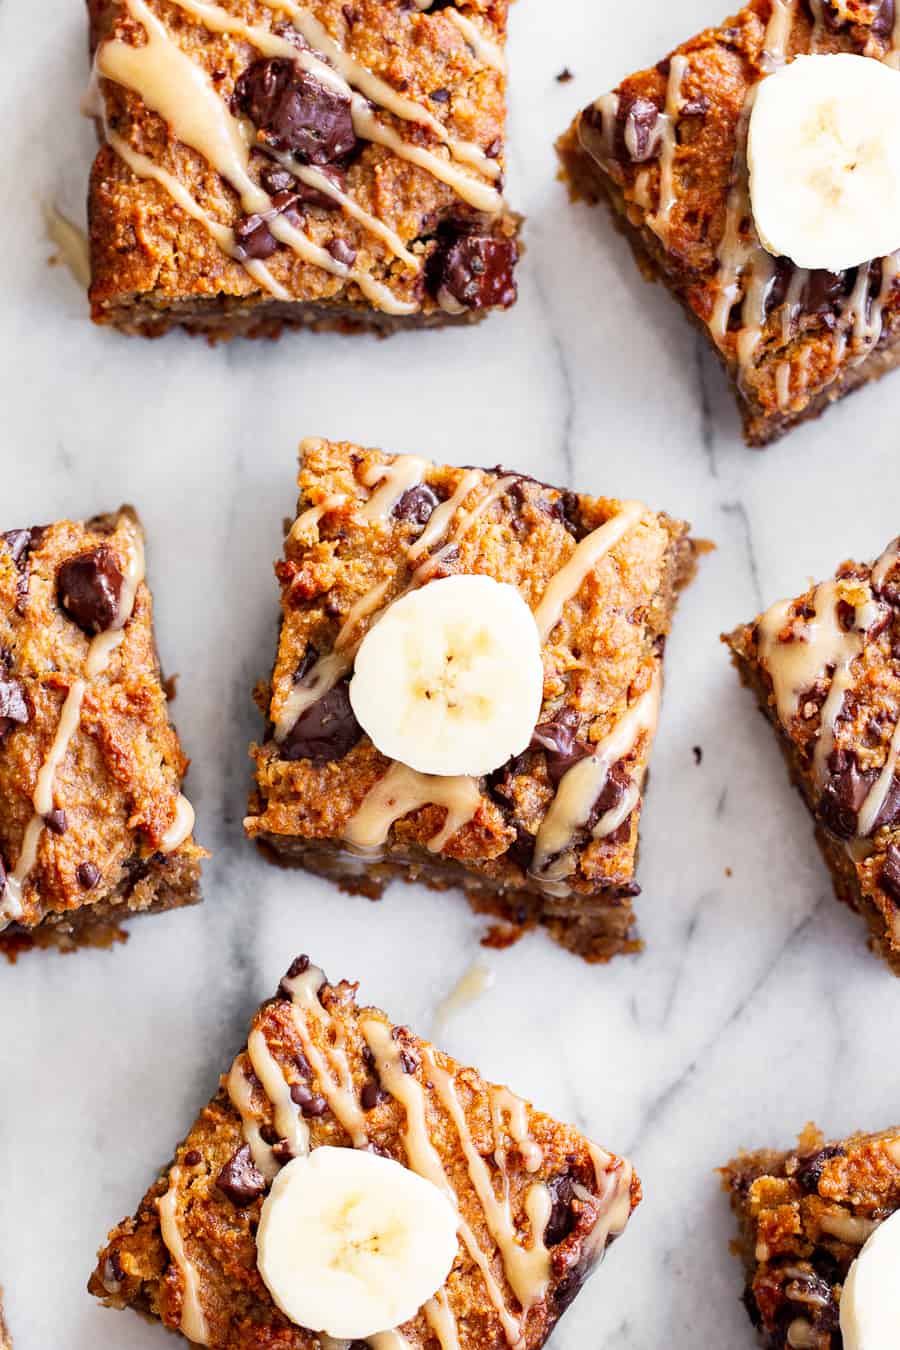 These one-bowl almond butter banana bread bars are a simple and totally delicious treat to make any time!  Great for snacks and dessert, they’re packed with good fats, banana flavor and dark chocolate.  Top them with an almond butter icing to take them to the next level!  Vegan, paleo, refined sugar free, egg free. #paleo #vegan #glutenfree